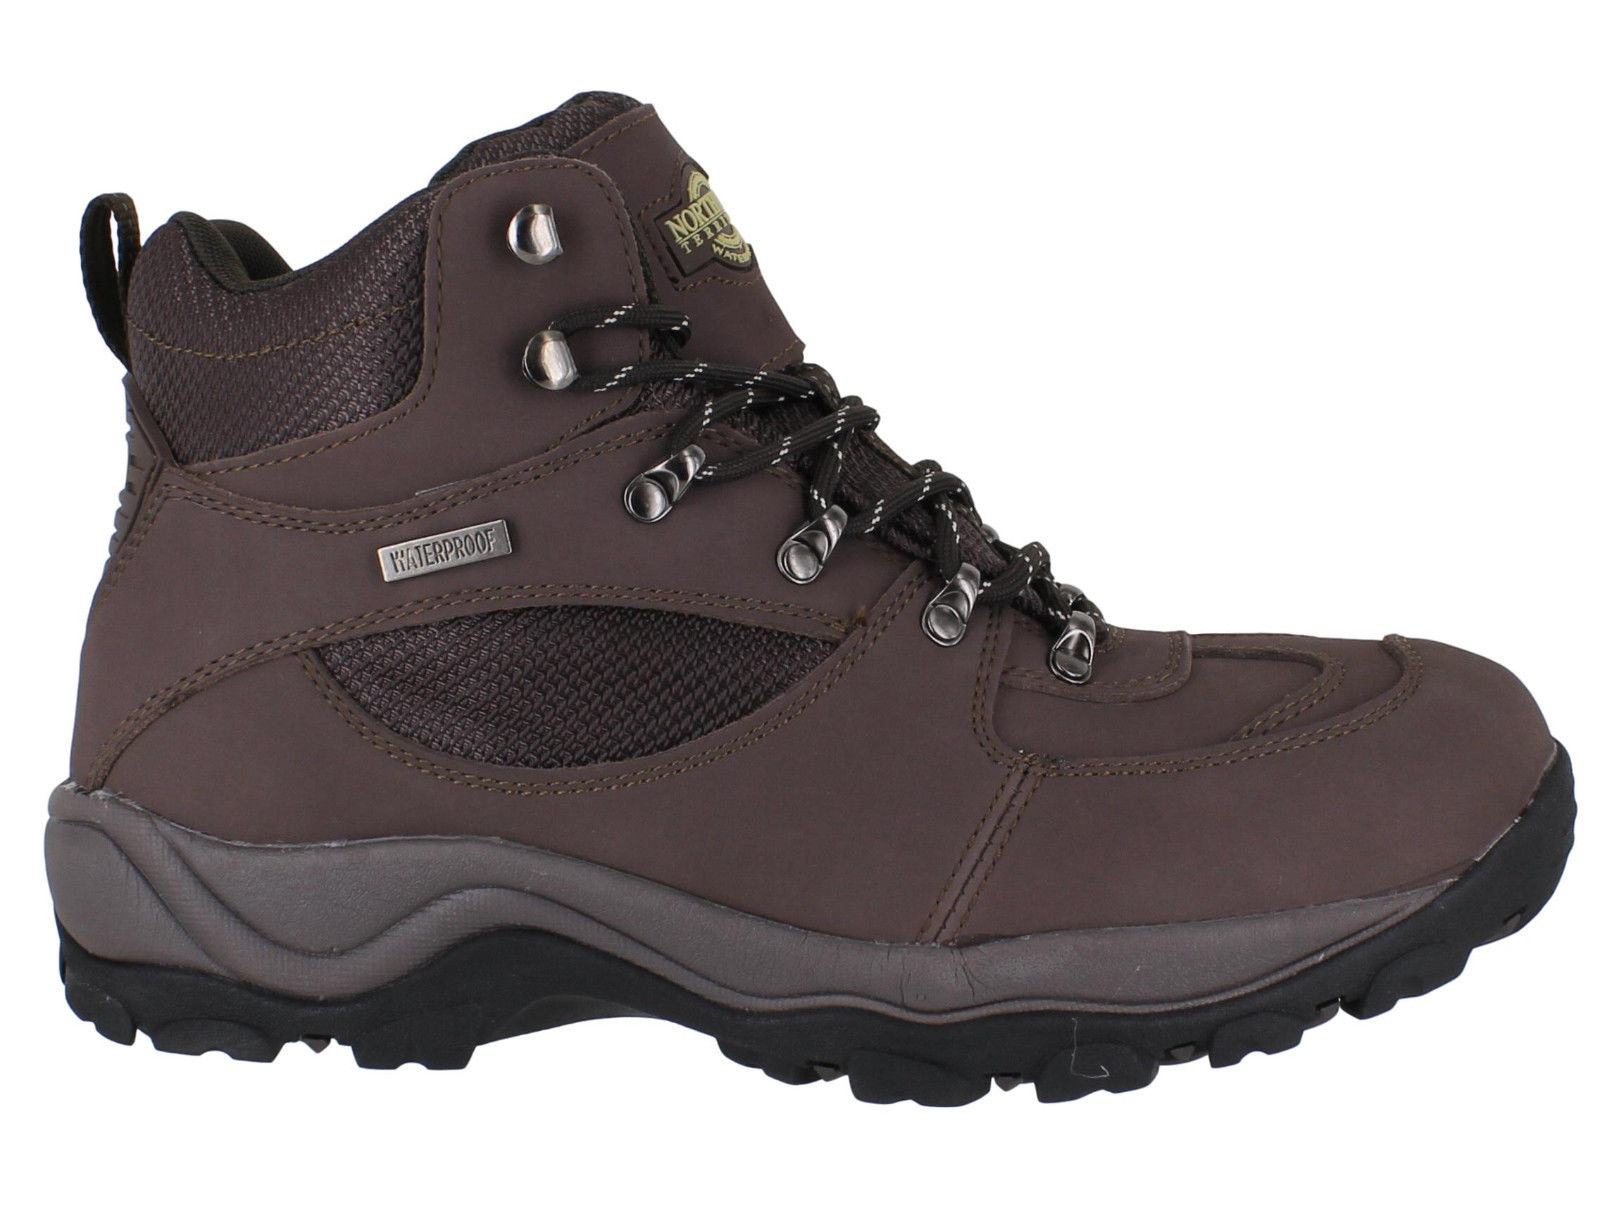 Mens NorthWest Hunter 2 Leather Trail Hiking Walking Lace Up Boots ...